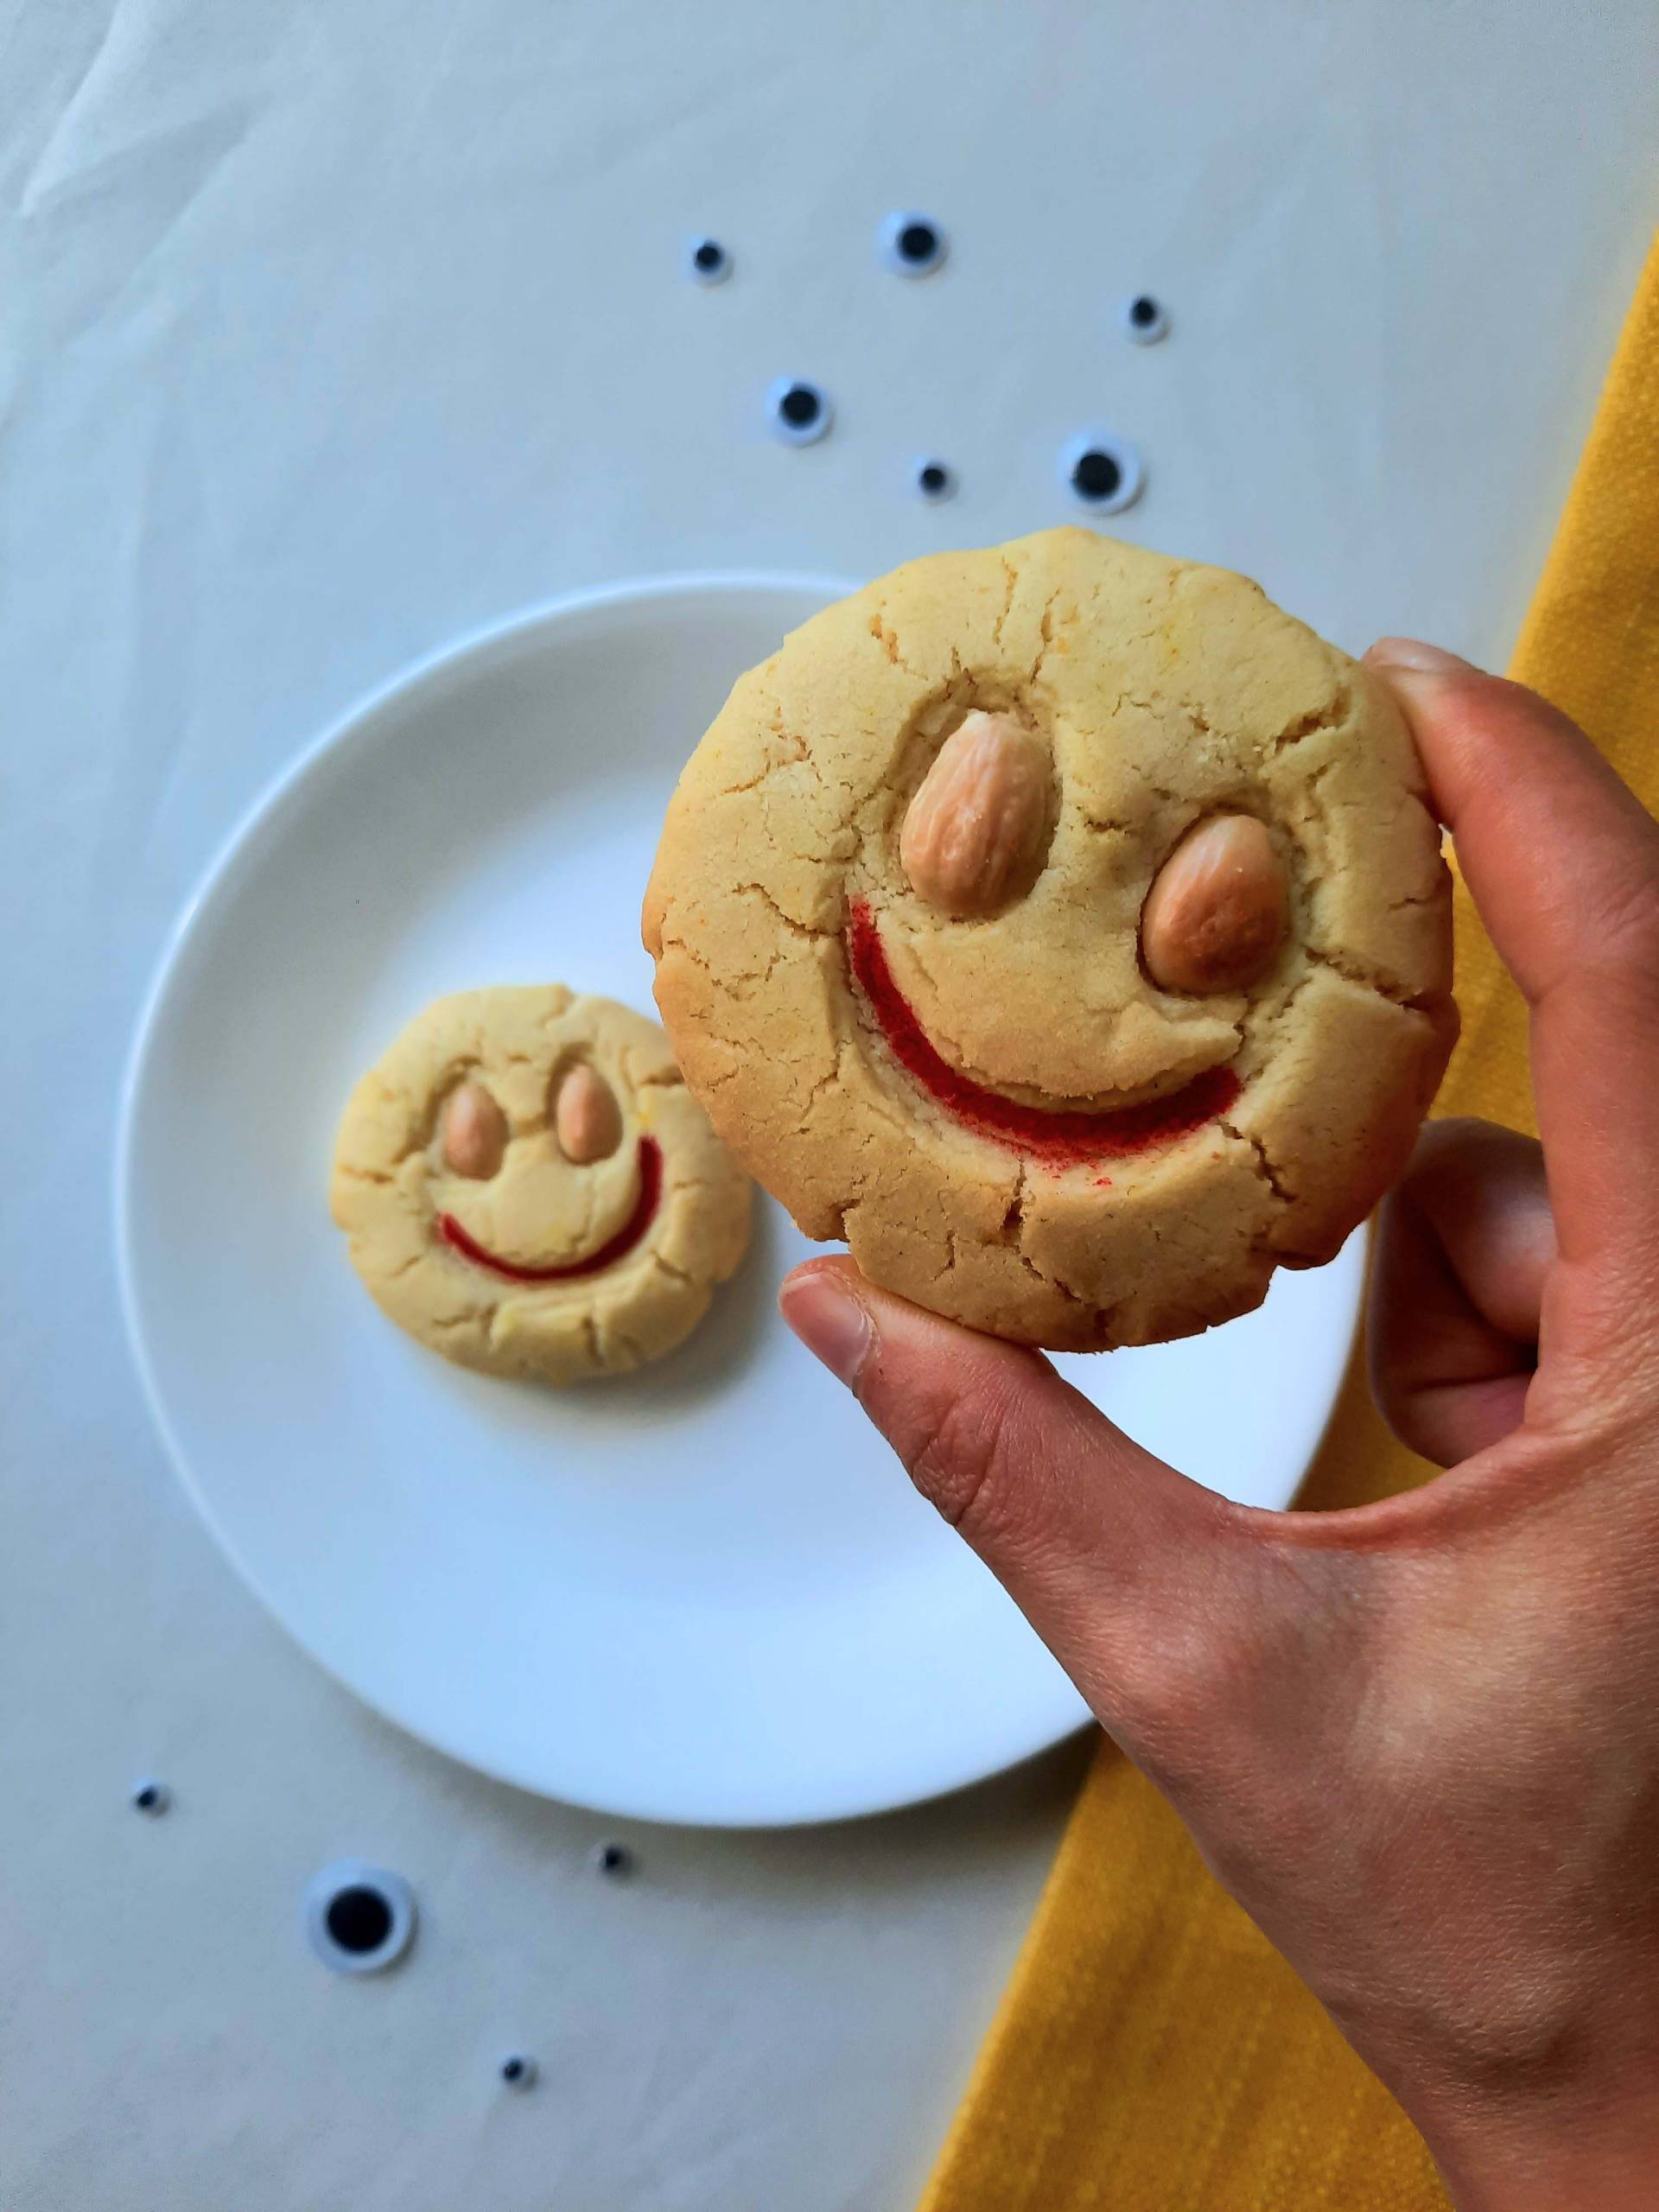 A hand holding a smiley-face almond cookie, with two almonds serving as the eyes.